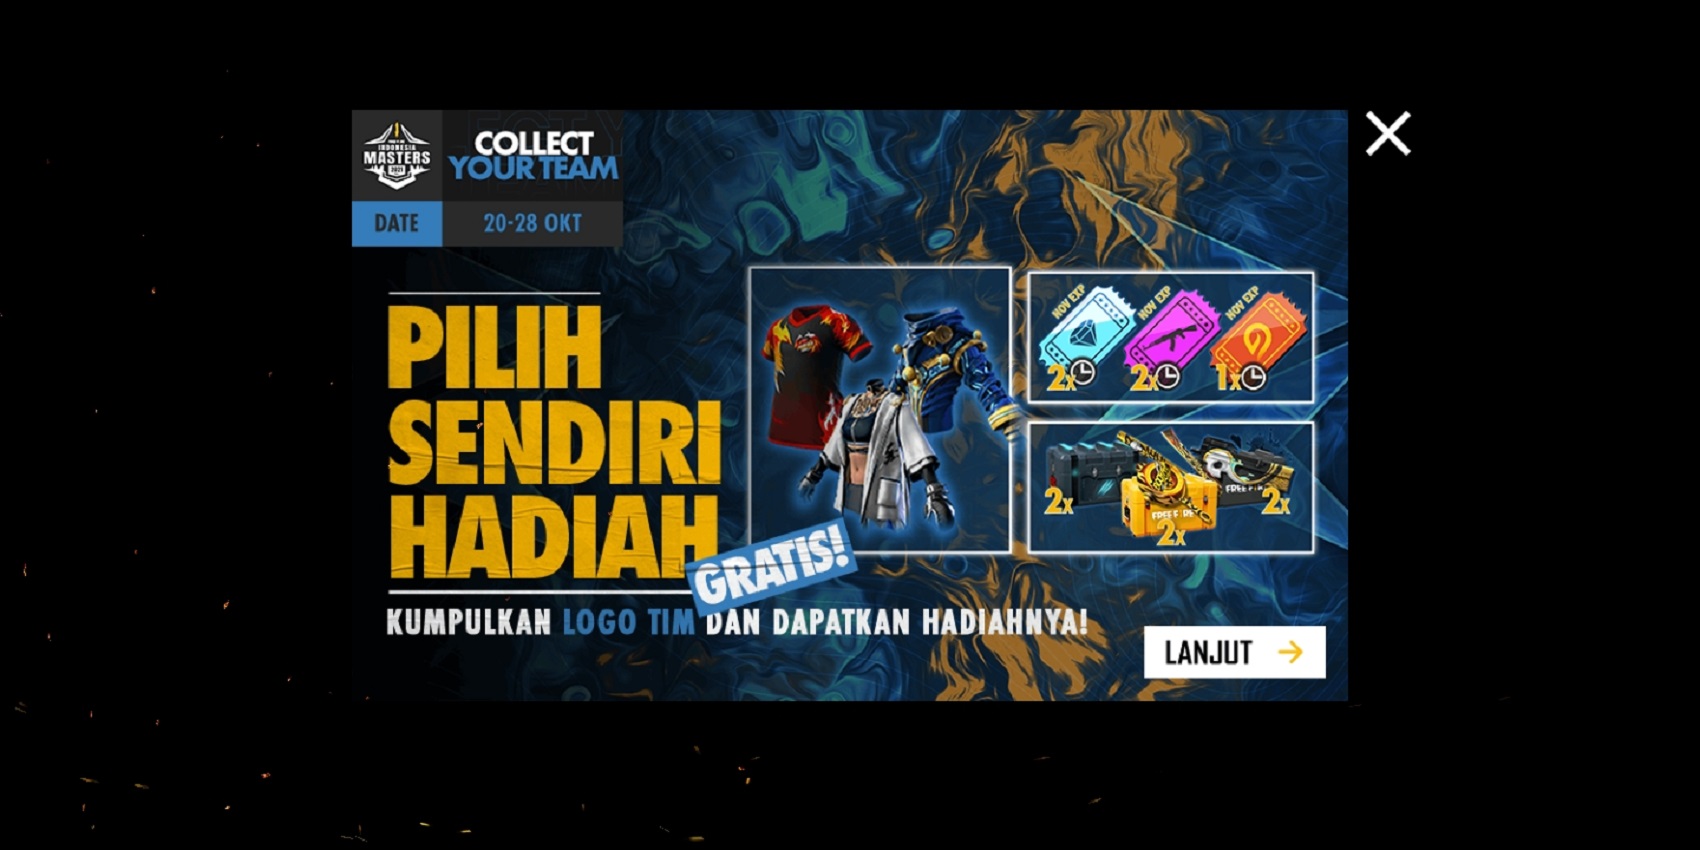 Cara Bermain Event Collect Your Team Free Fire (FF)